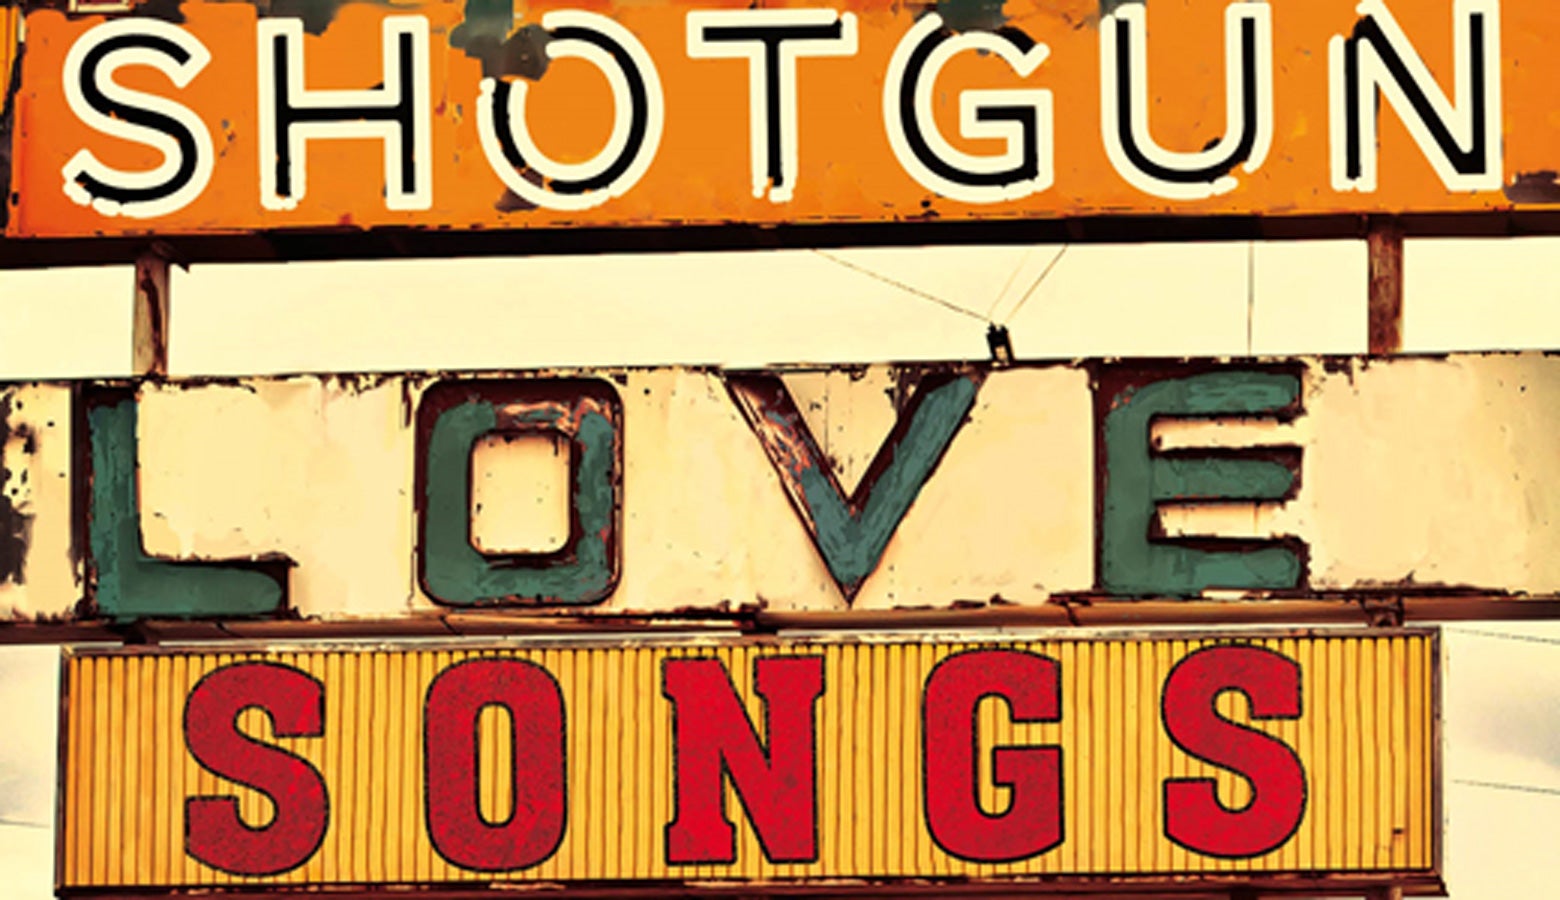 Three rusty old signs stacked on top of one another spelling out SHOTGUN LOVE SONGS